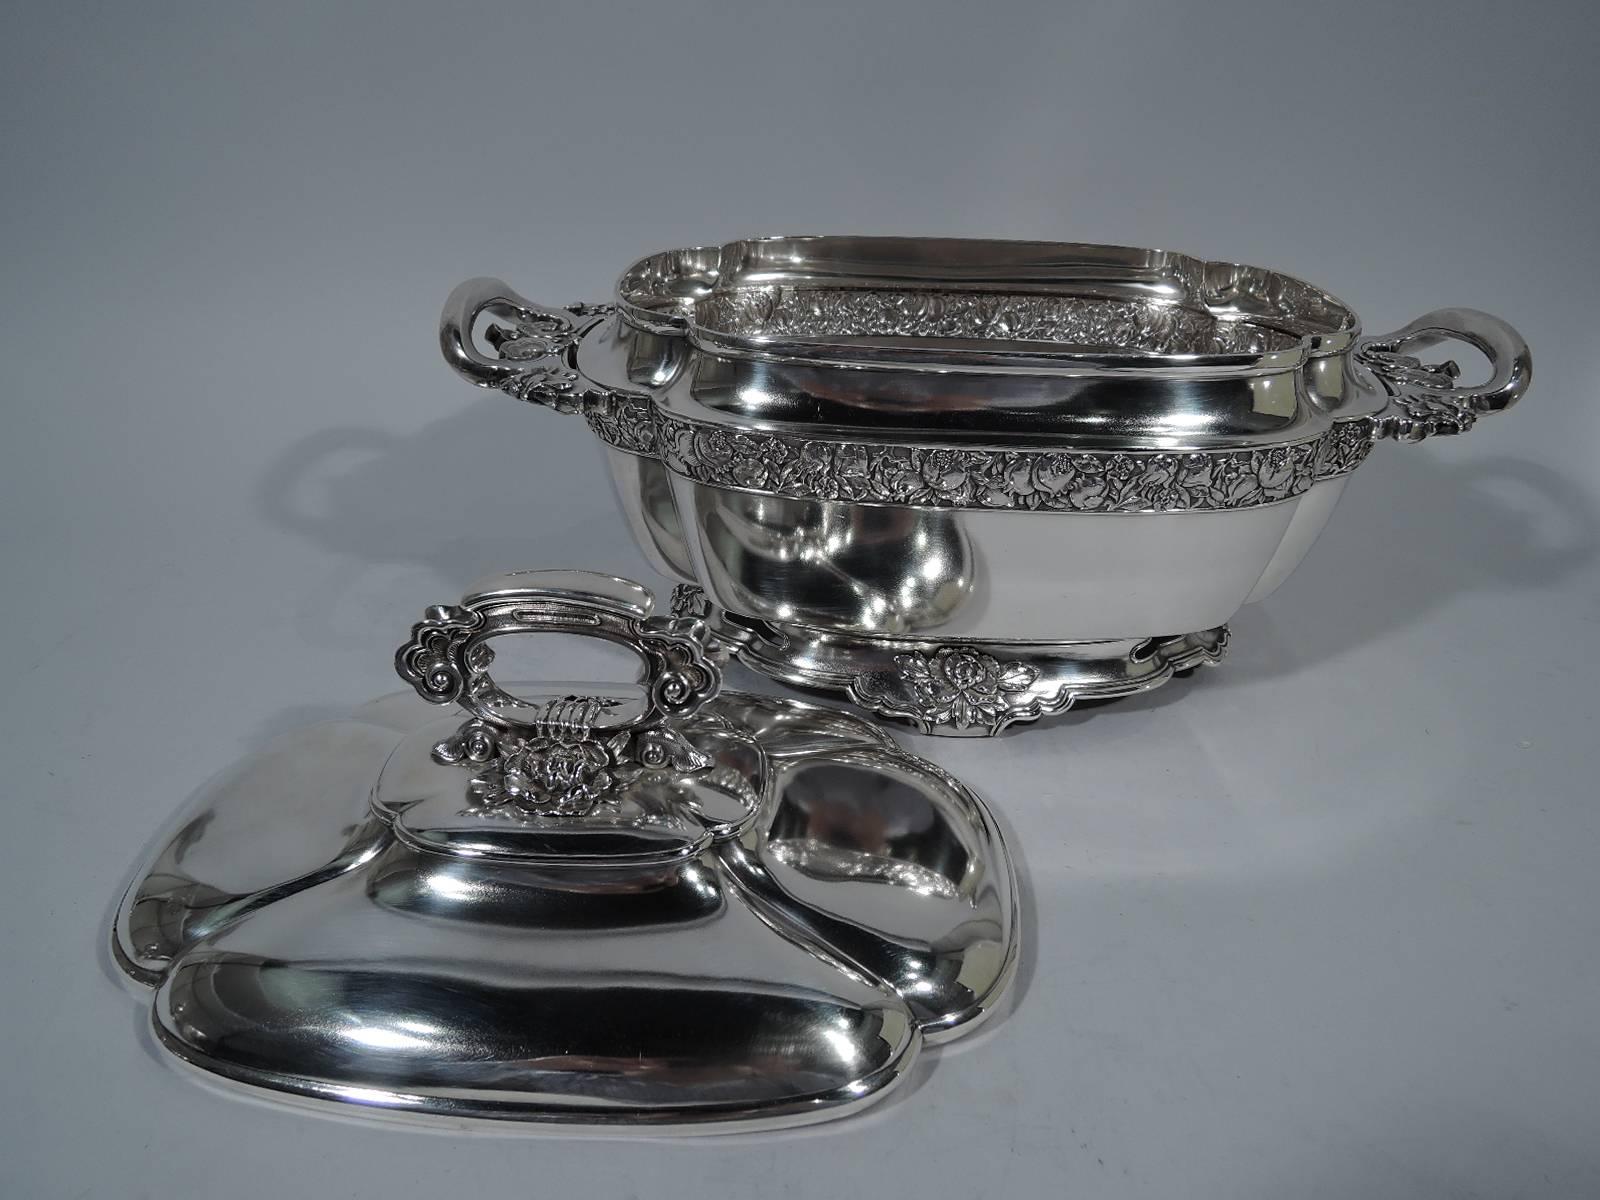 Chinese-style sterling silver tureen. Made by Tiffany & Co. in New York, circa 1877. Lobed body with open end handles and spread base on 4 volutes. Cover domed and lobed with open handle. Chinese ornament including clouds, rooster heads, and